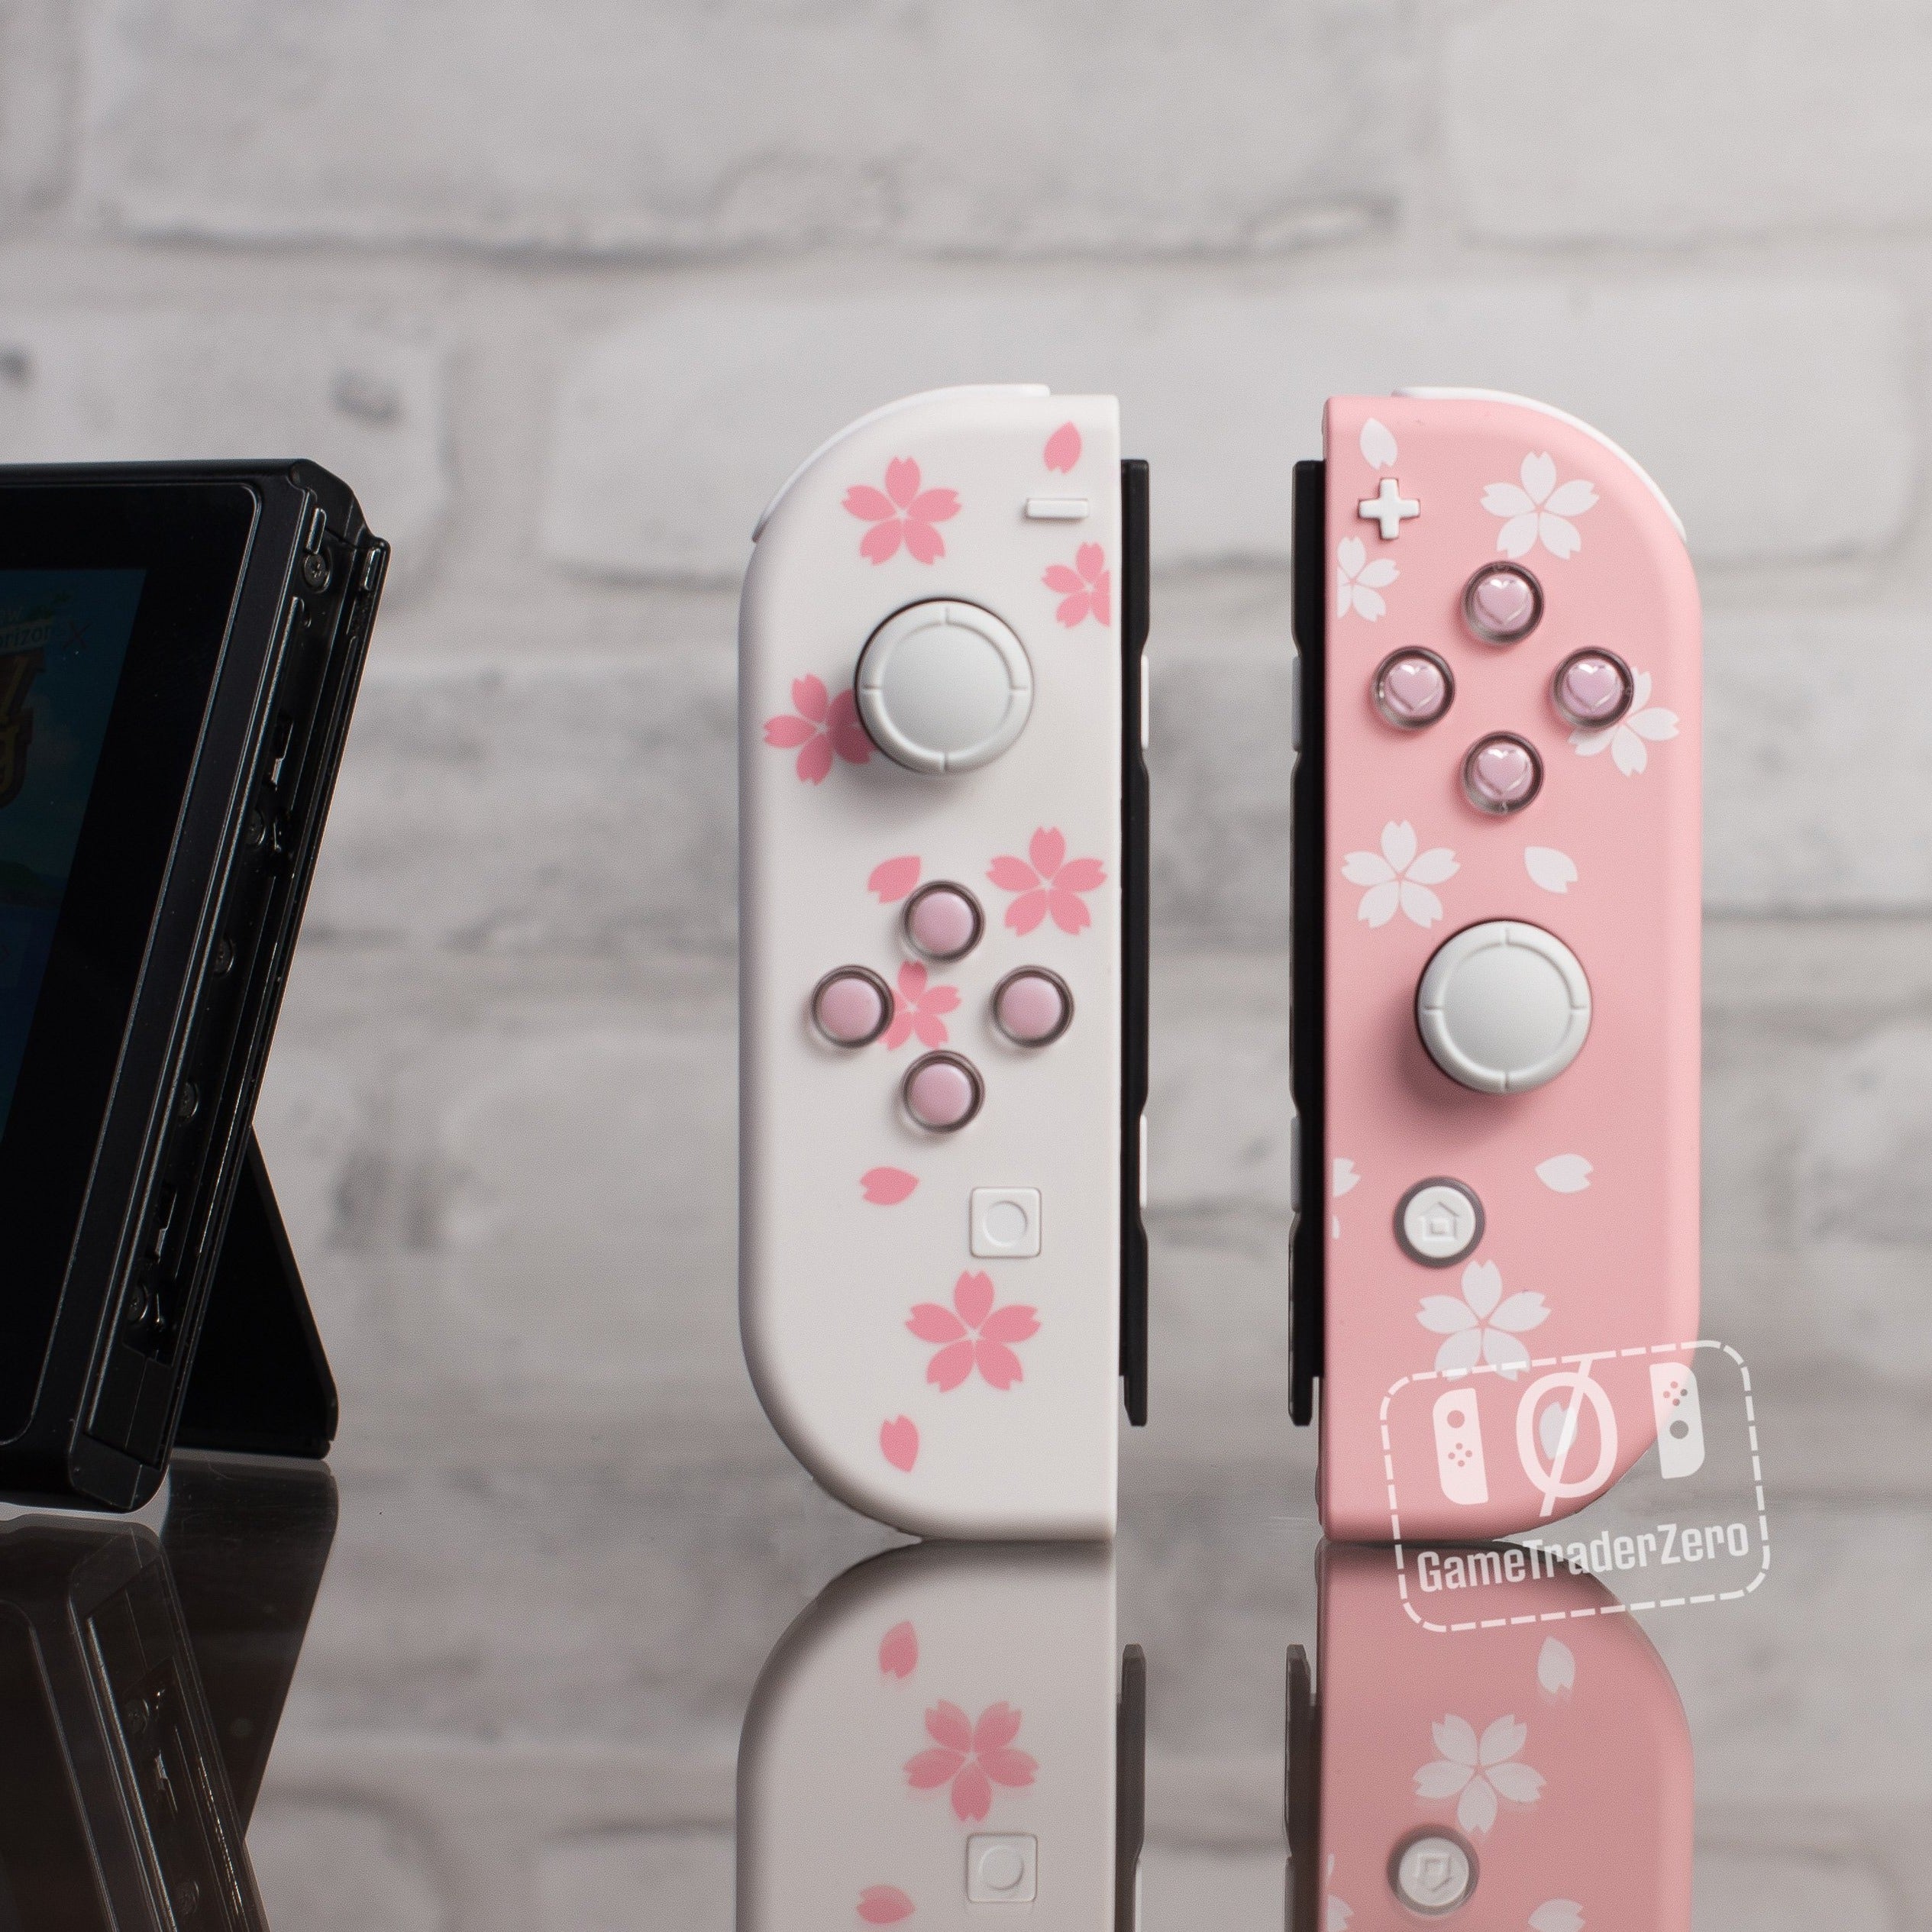 Sakura Flowers Joy-Con Mod with Pink Hearts Candy Buttons Pink and White  Nintendo SWITCH Controllers